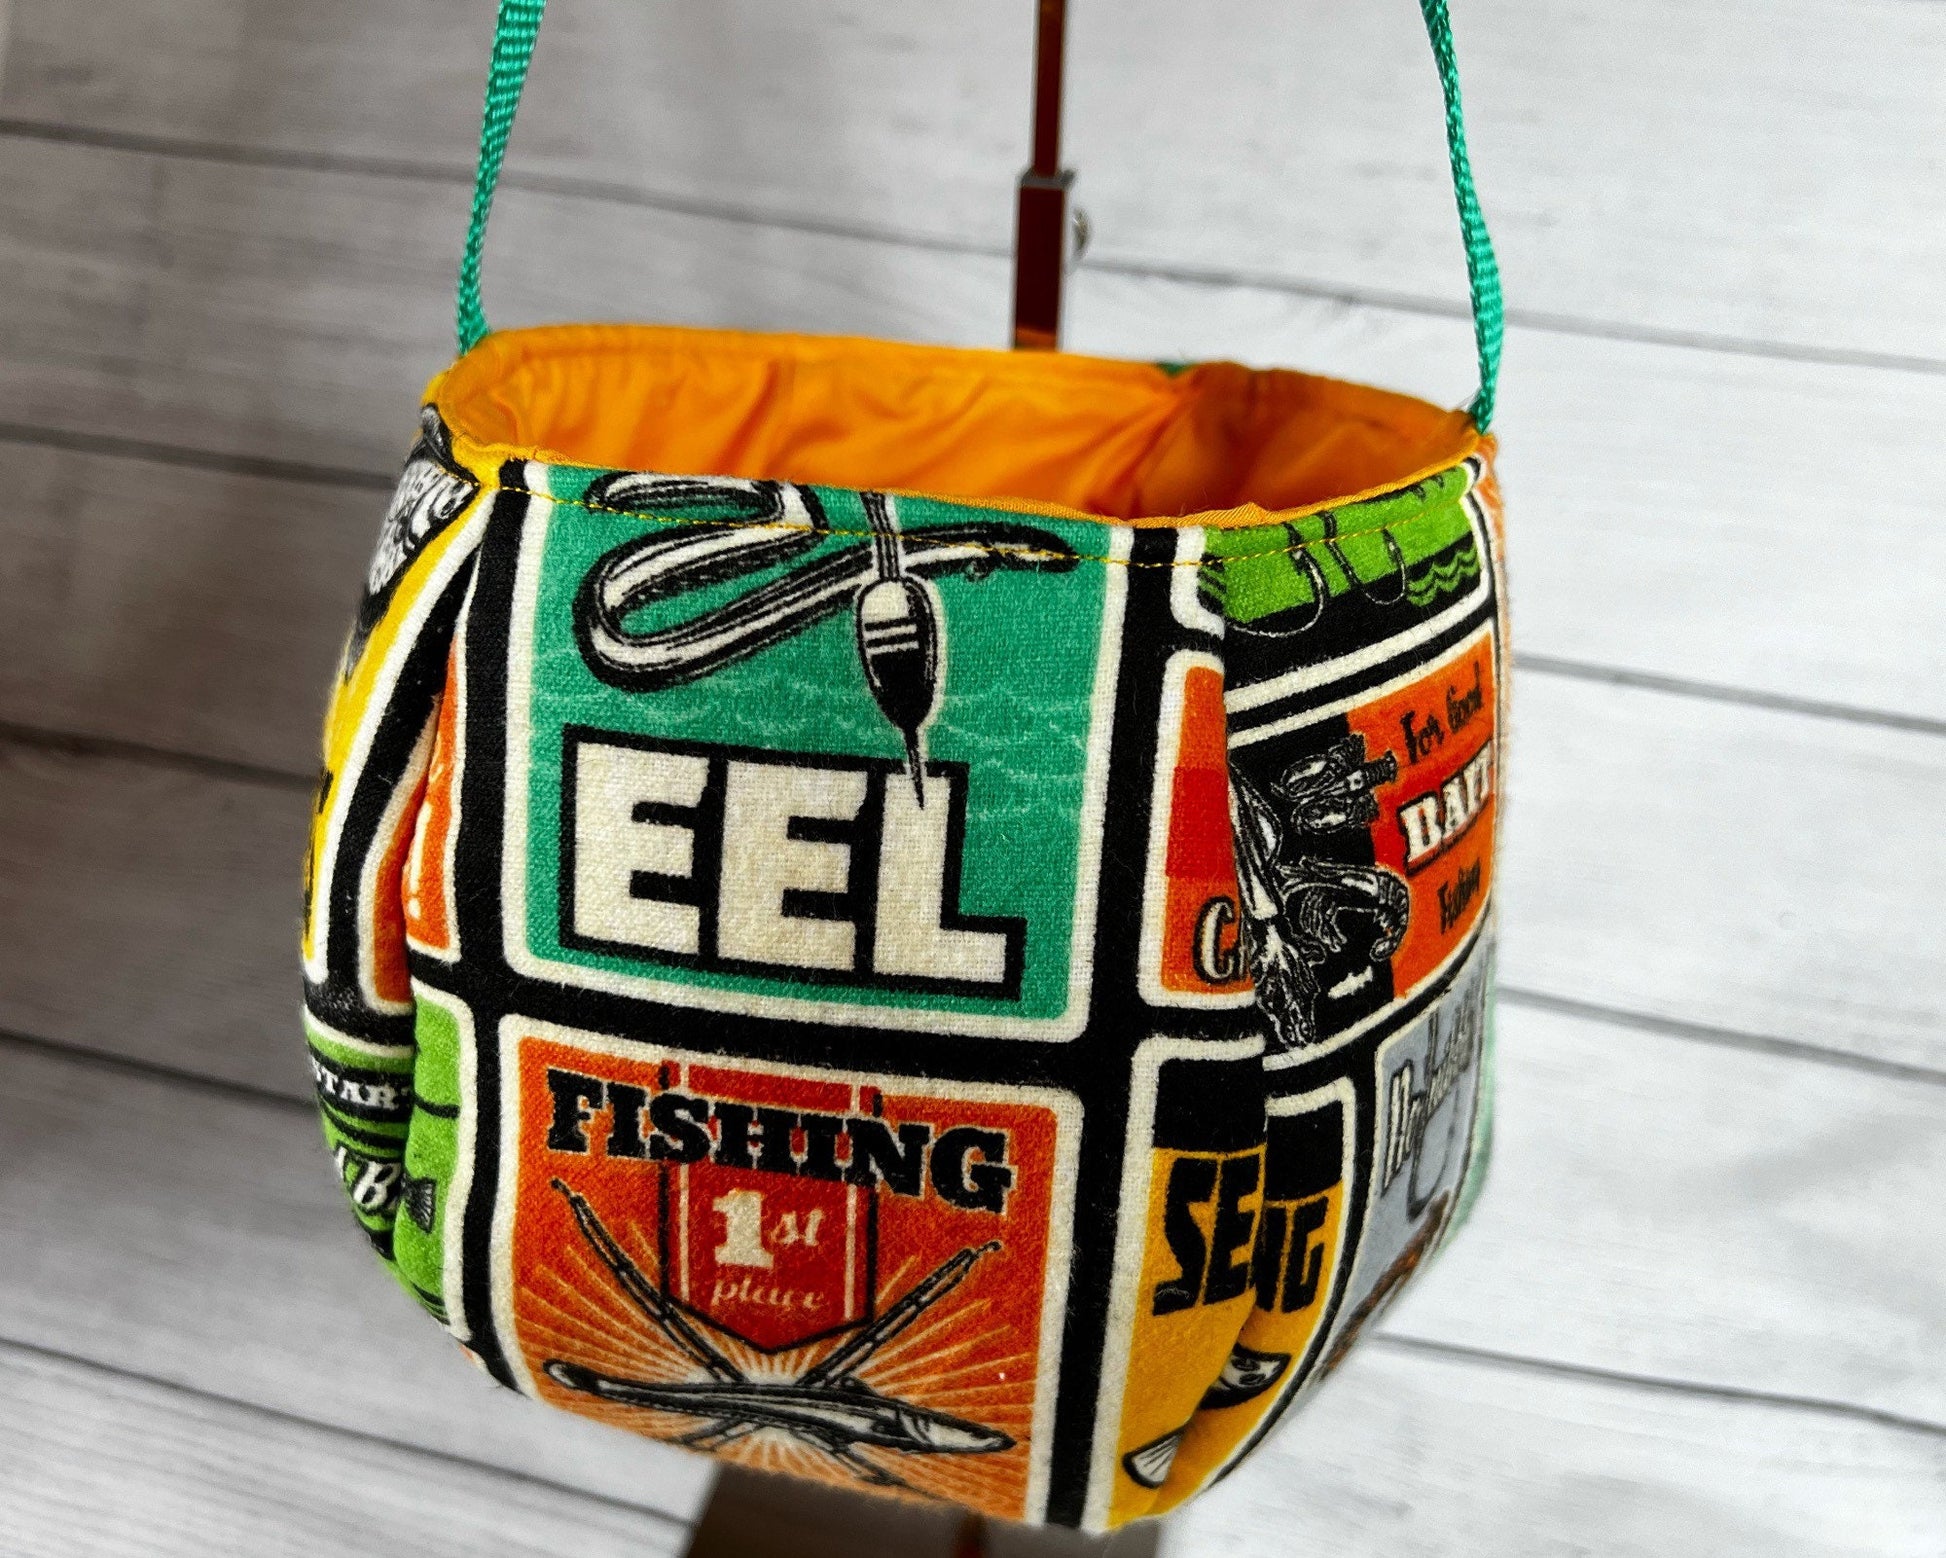 Fishing Tote Bag - Bag - Tote - Fish - Eel - Courses - Hooks - Bait - Gift - Everyday - Holiday - Easter - Halloween